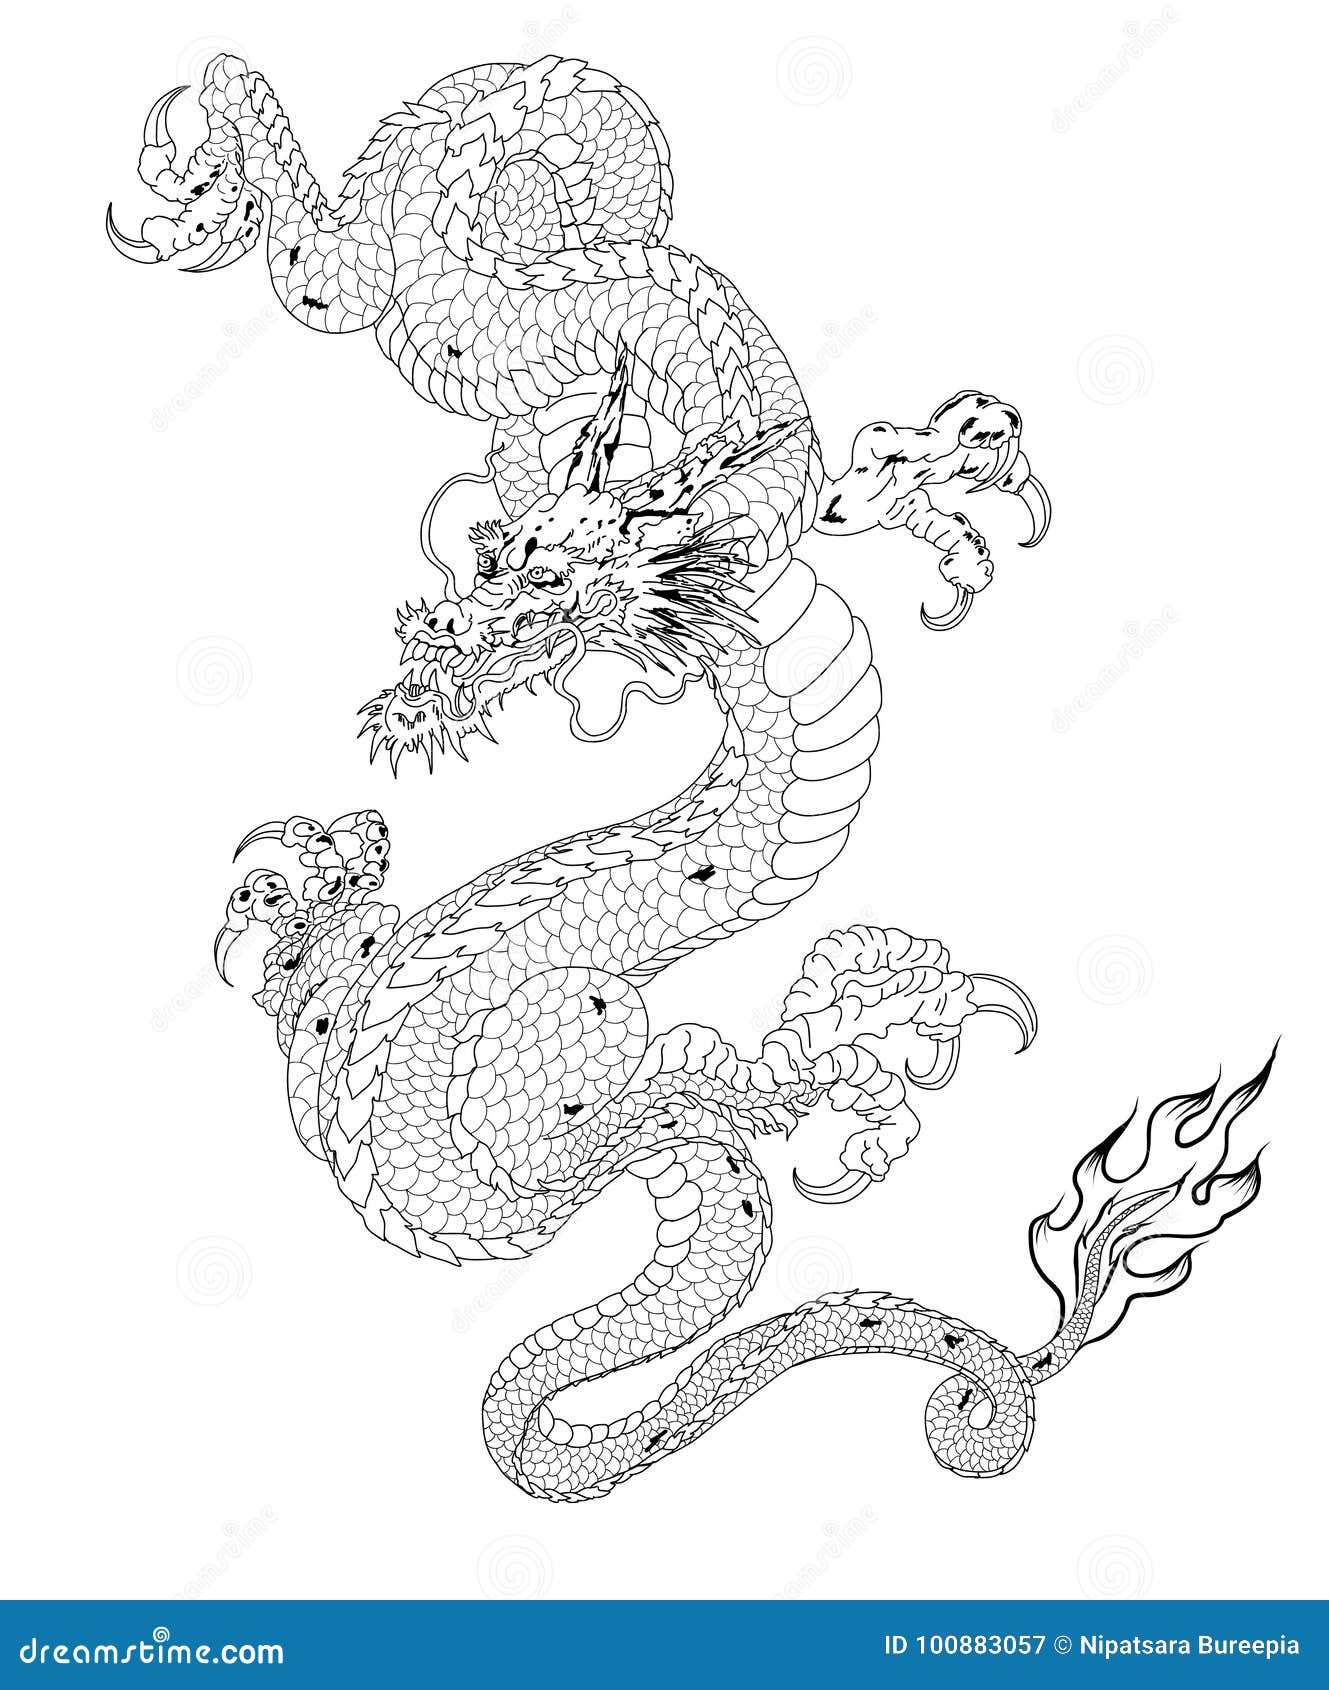 Chinese Dragon Tattoo Meaning  neartattoos